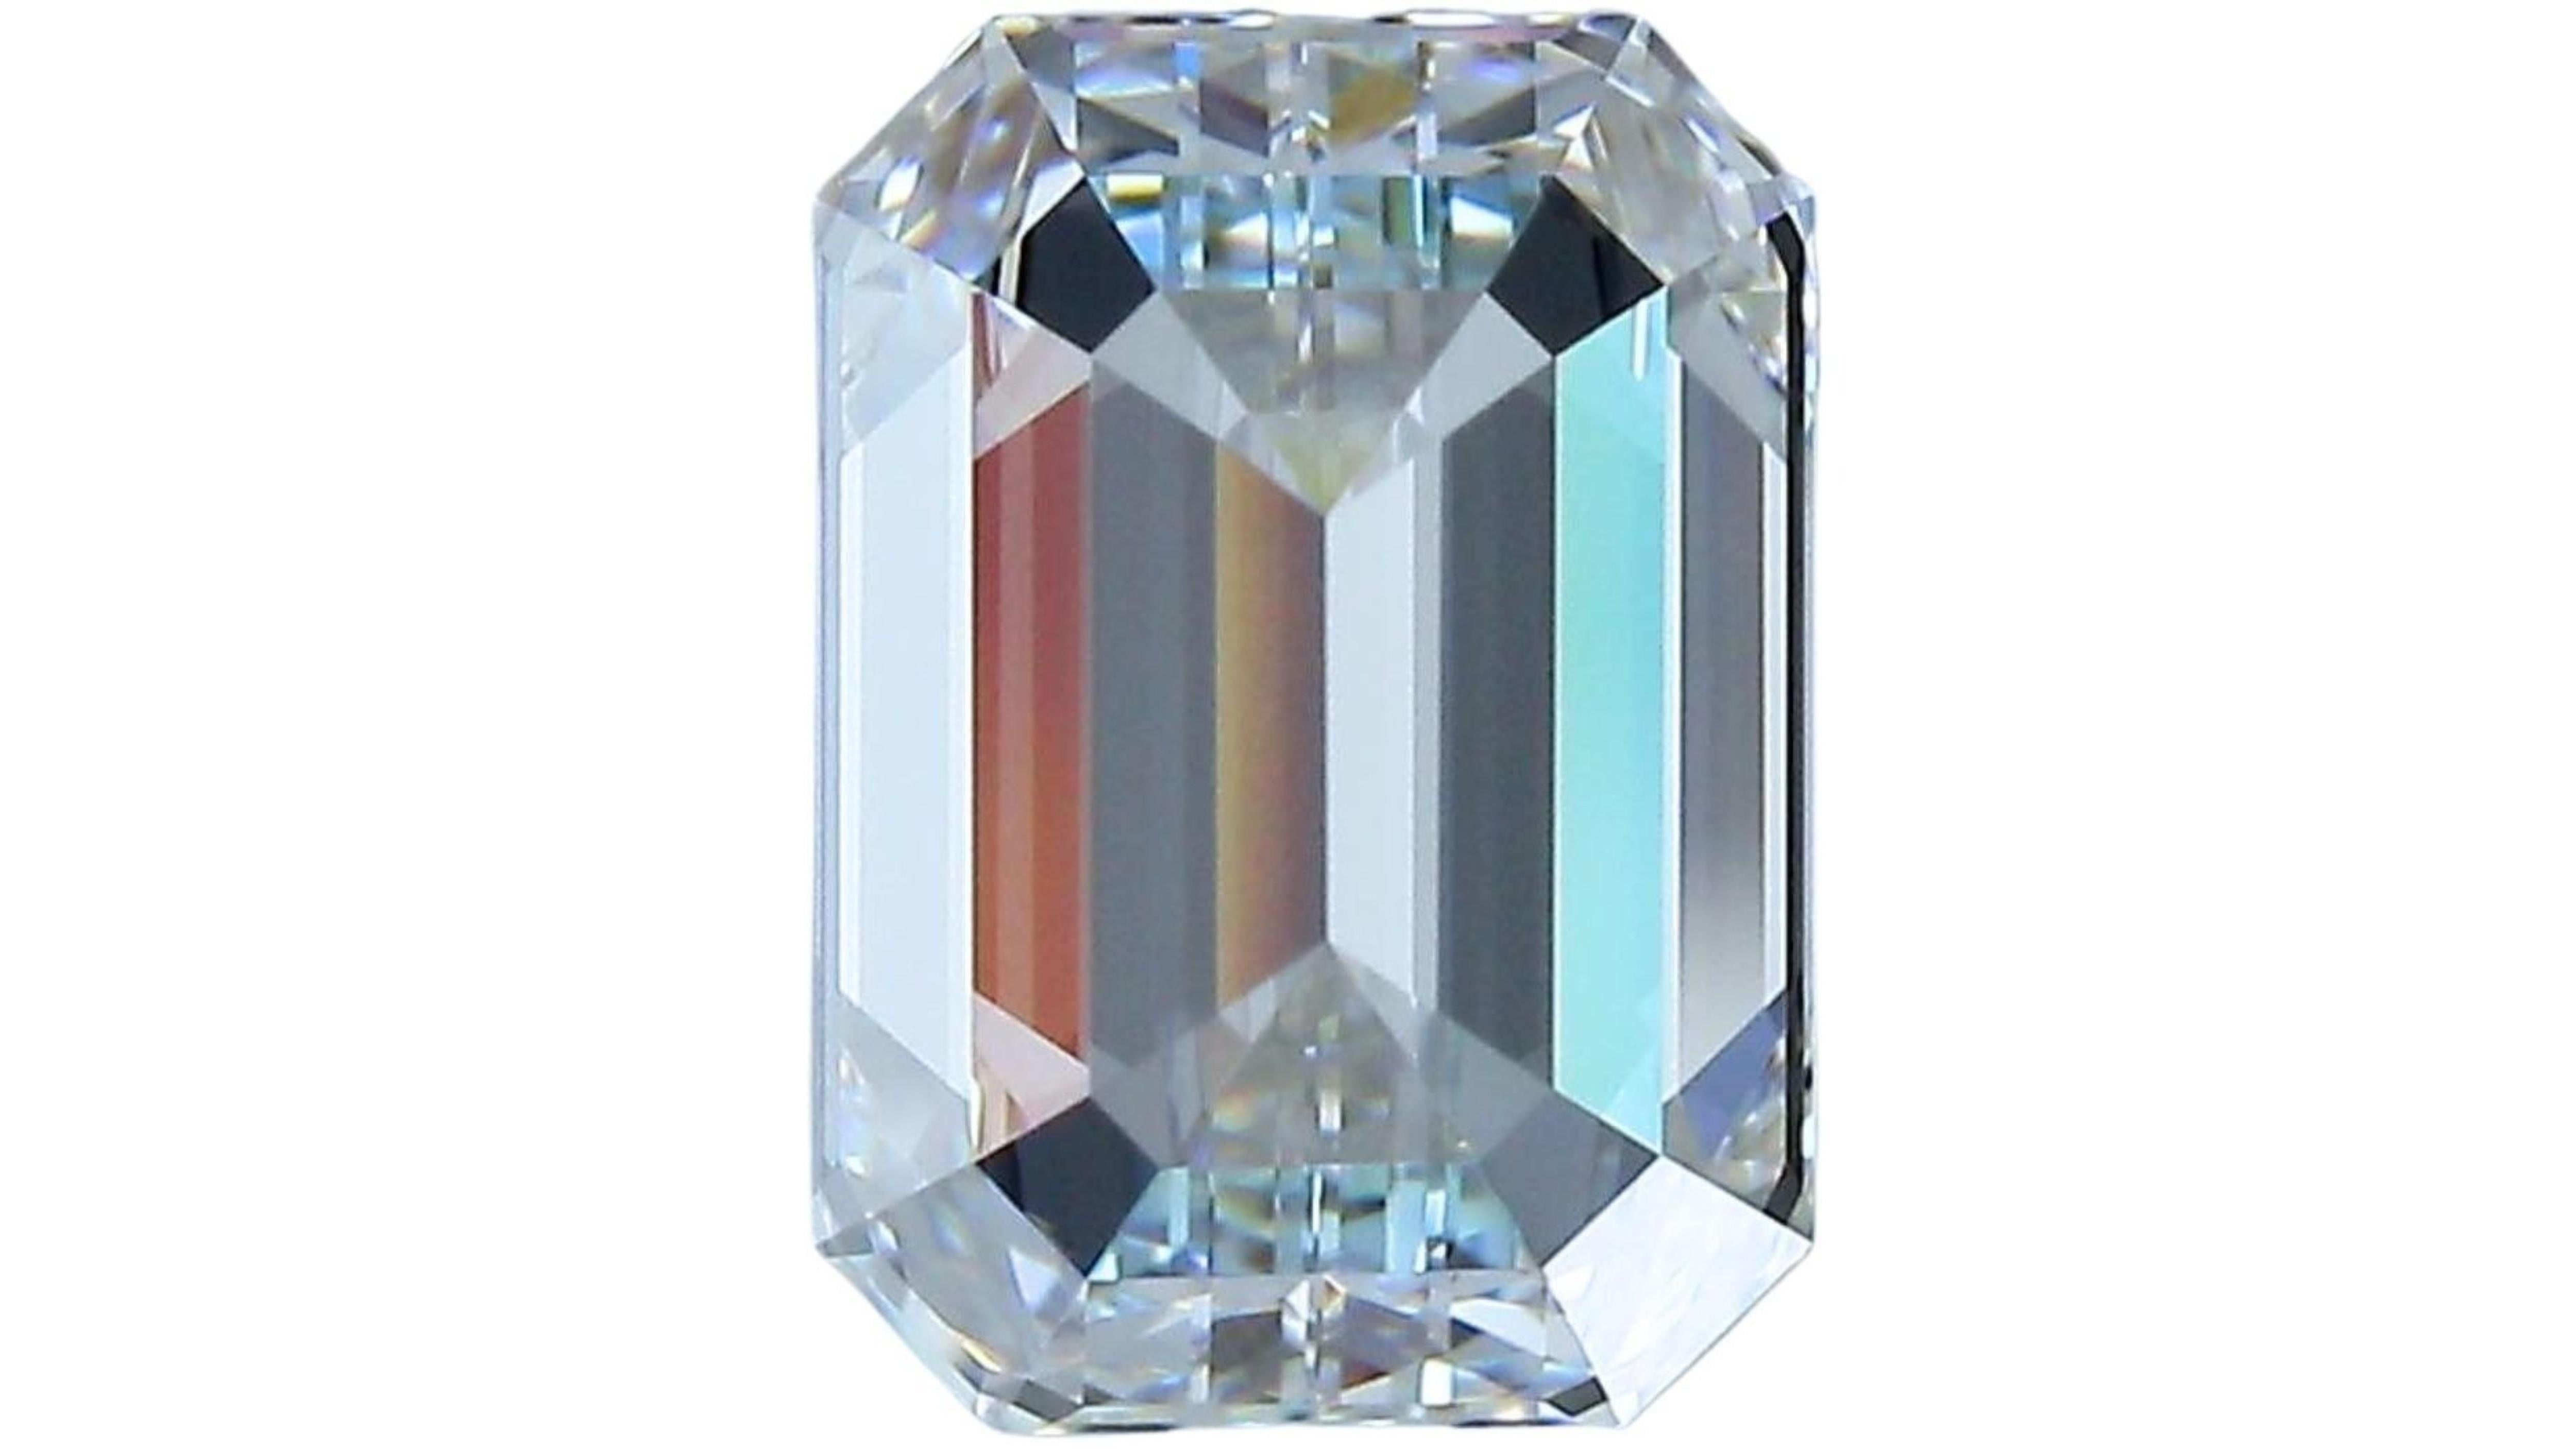 1pc. Shimmering 2.44 Carat Emerald Cut Natural Diamond For Sale 1